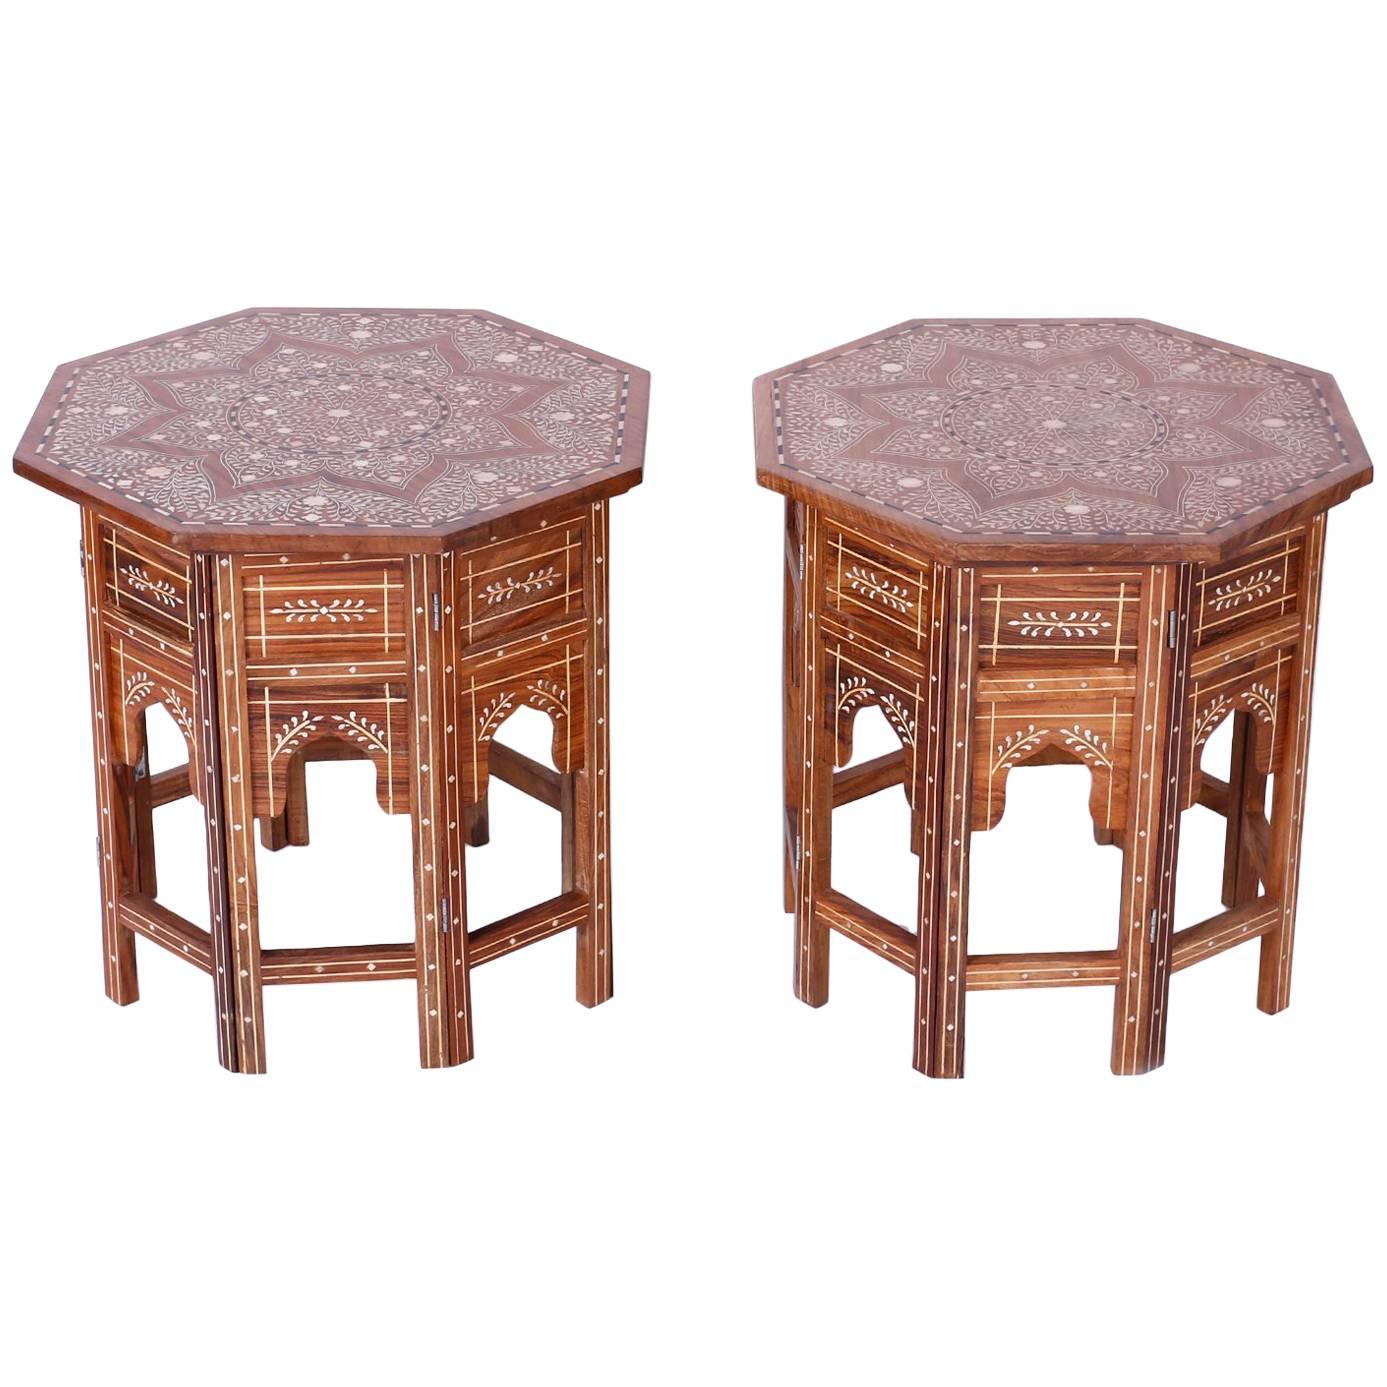 Pair of Inlaid Syrian Side Tables